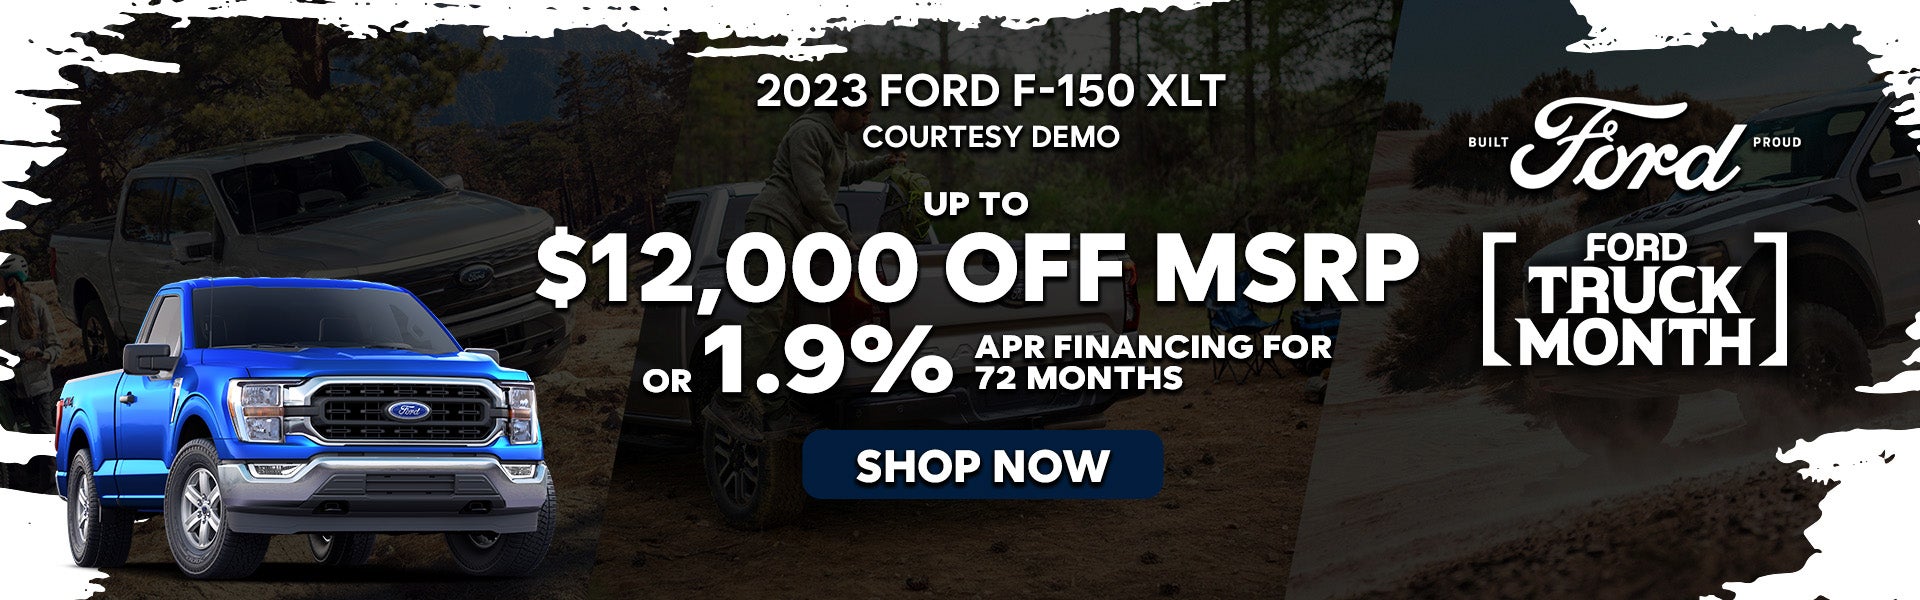 2023 Ford F-150 XLT Courtesy Vehicle Special Offer